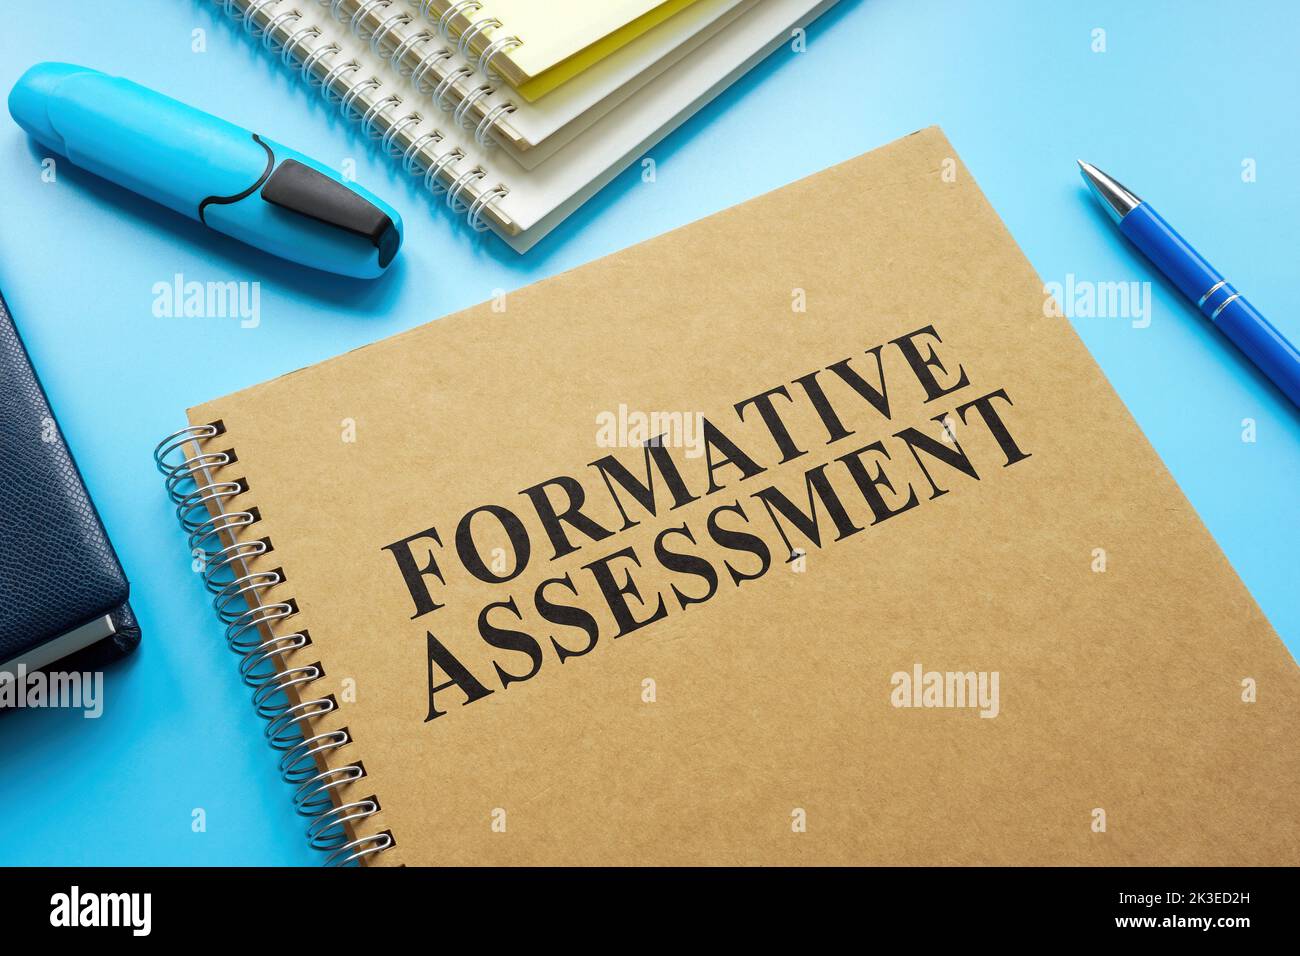 Formative Assessment guide and notebooks on the desk. Stock Photo